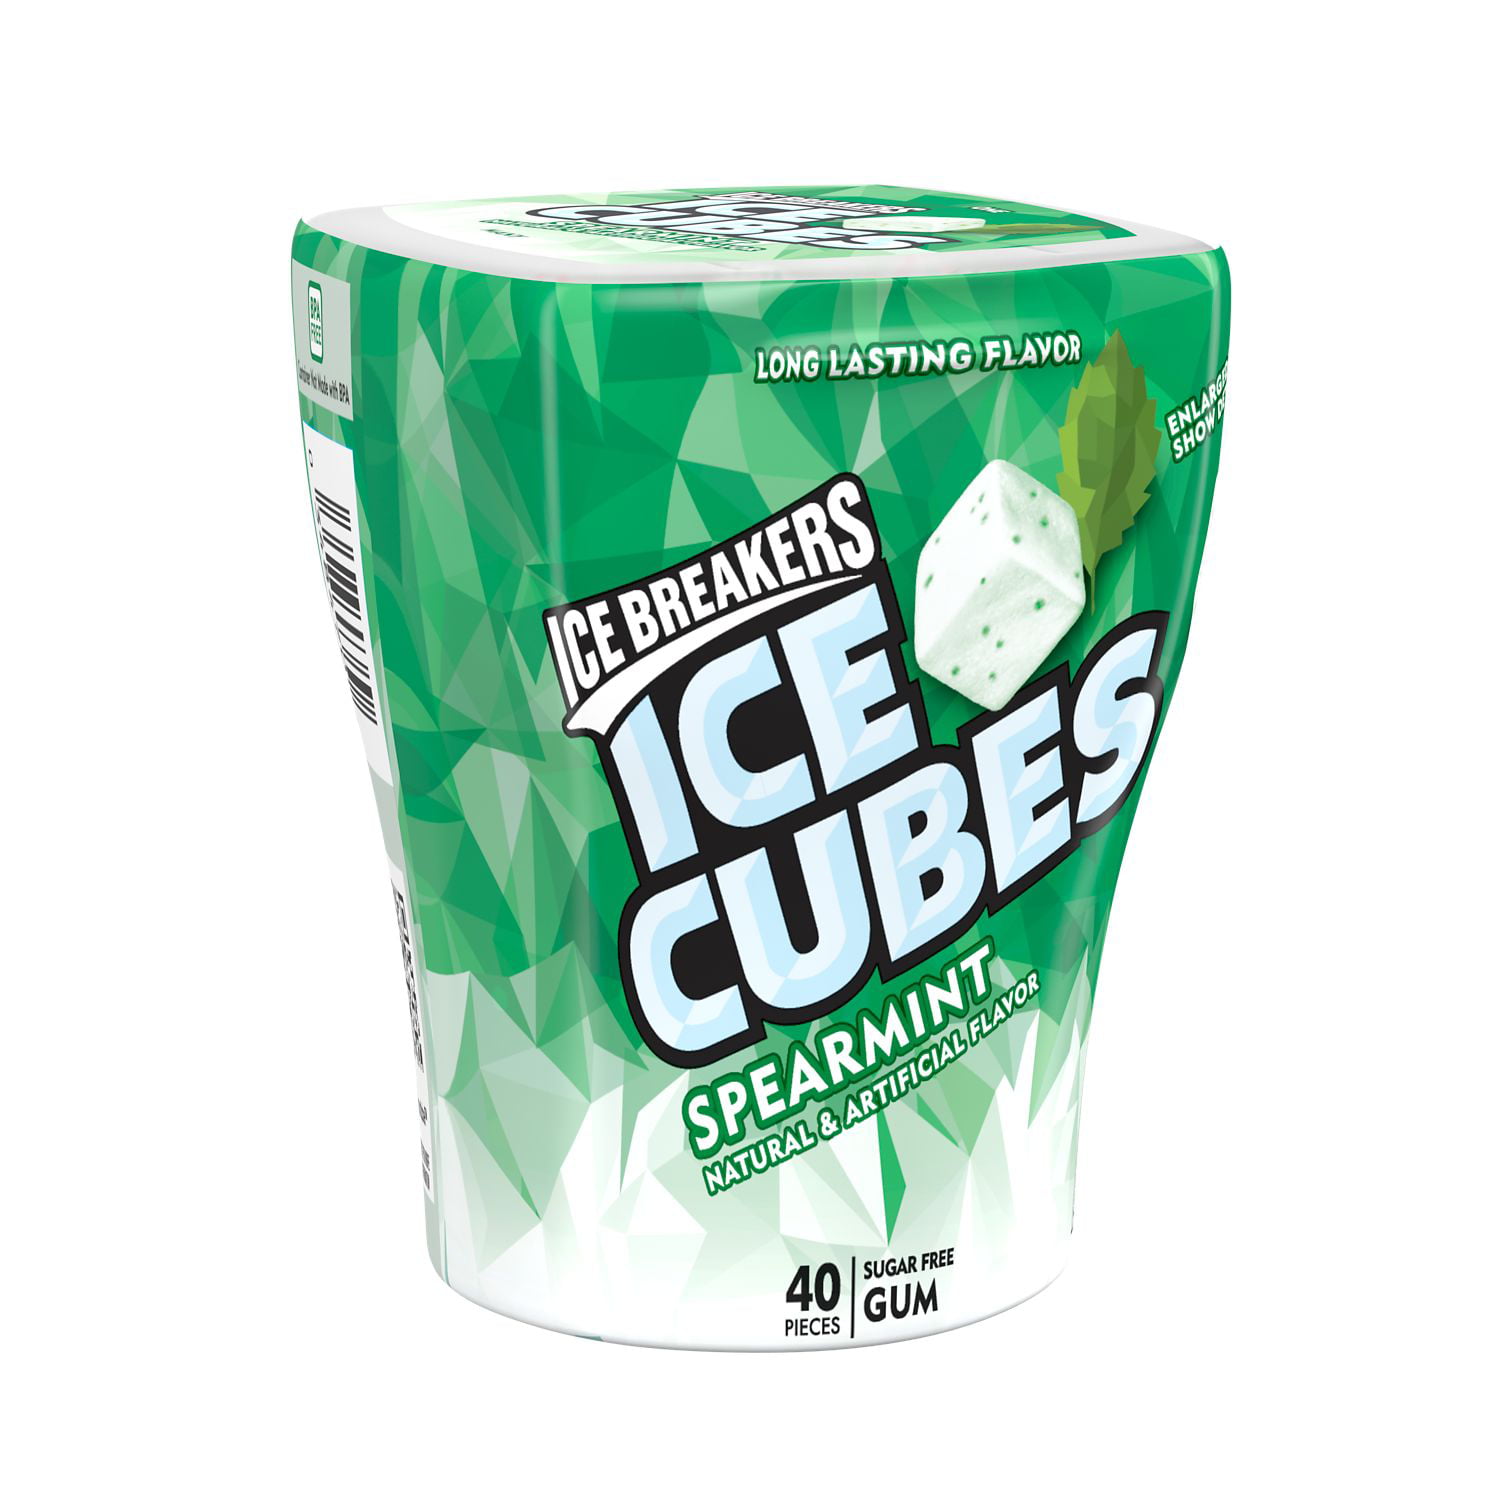 ICE BREAKERS ICE CUBES Spearmint Flavored Sugar Free Chewing Gum, Made with Xylitol, 40 Piece, Bottle